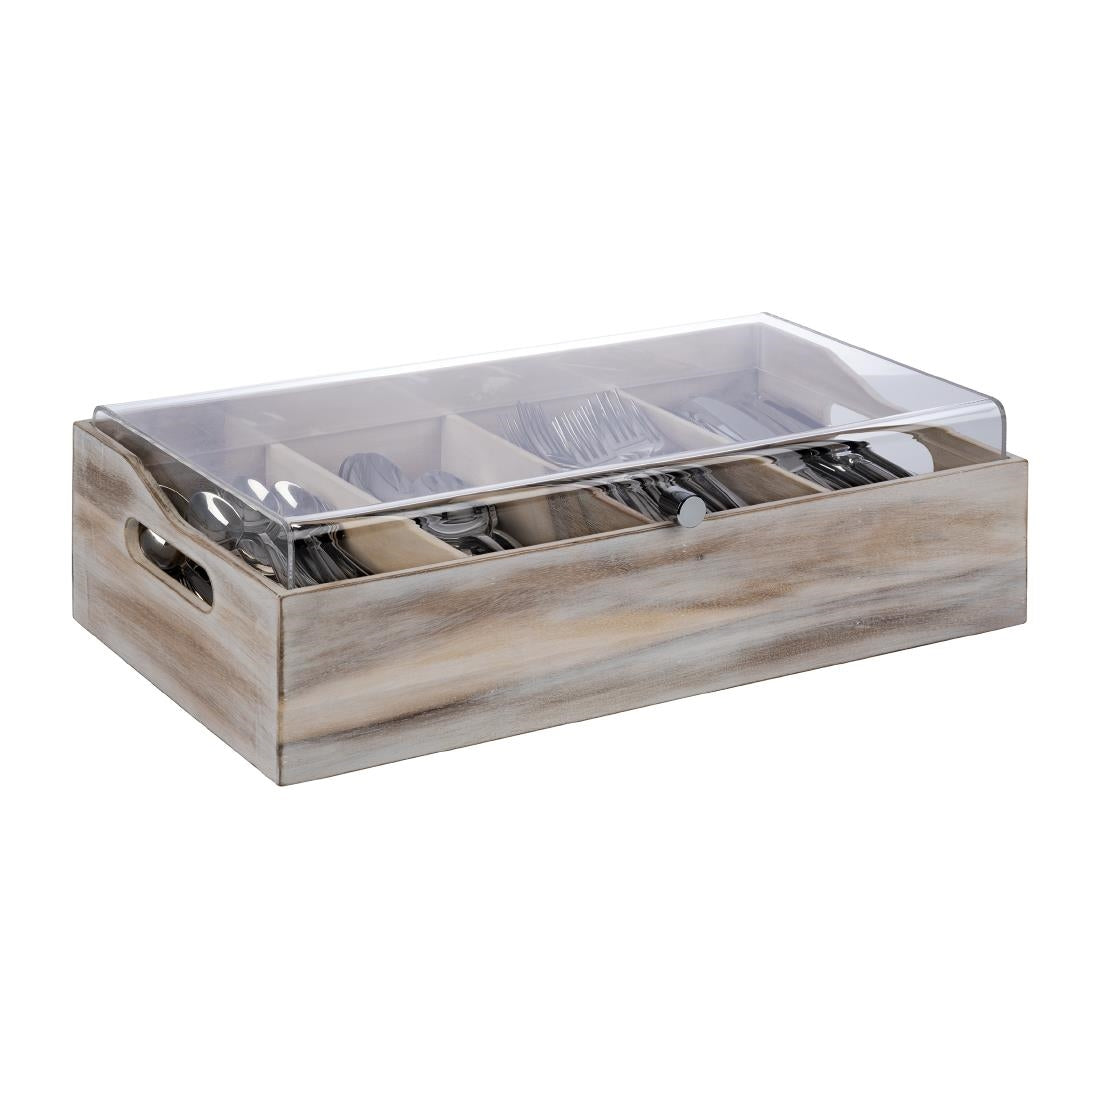 FT157 APS Cutlery Tray With Cover 510 x 280mm JD Catering Equipment Solutions Ltd